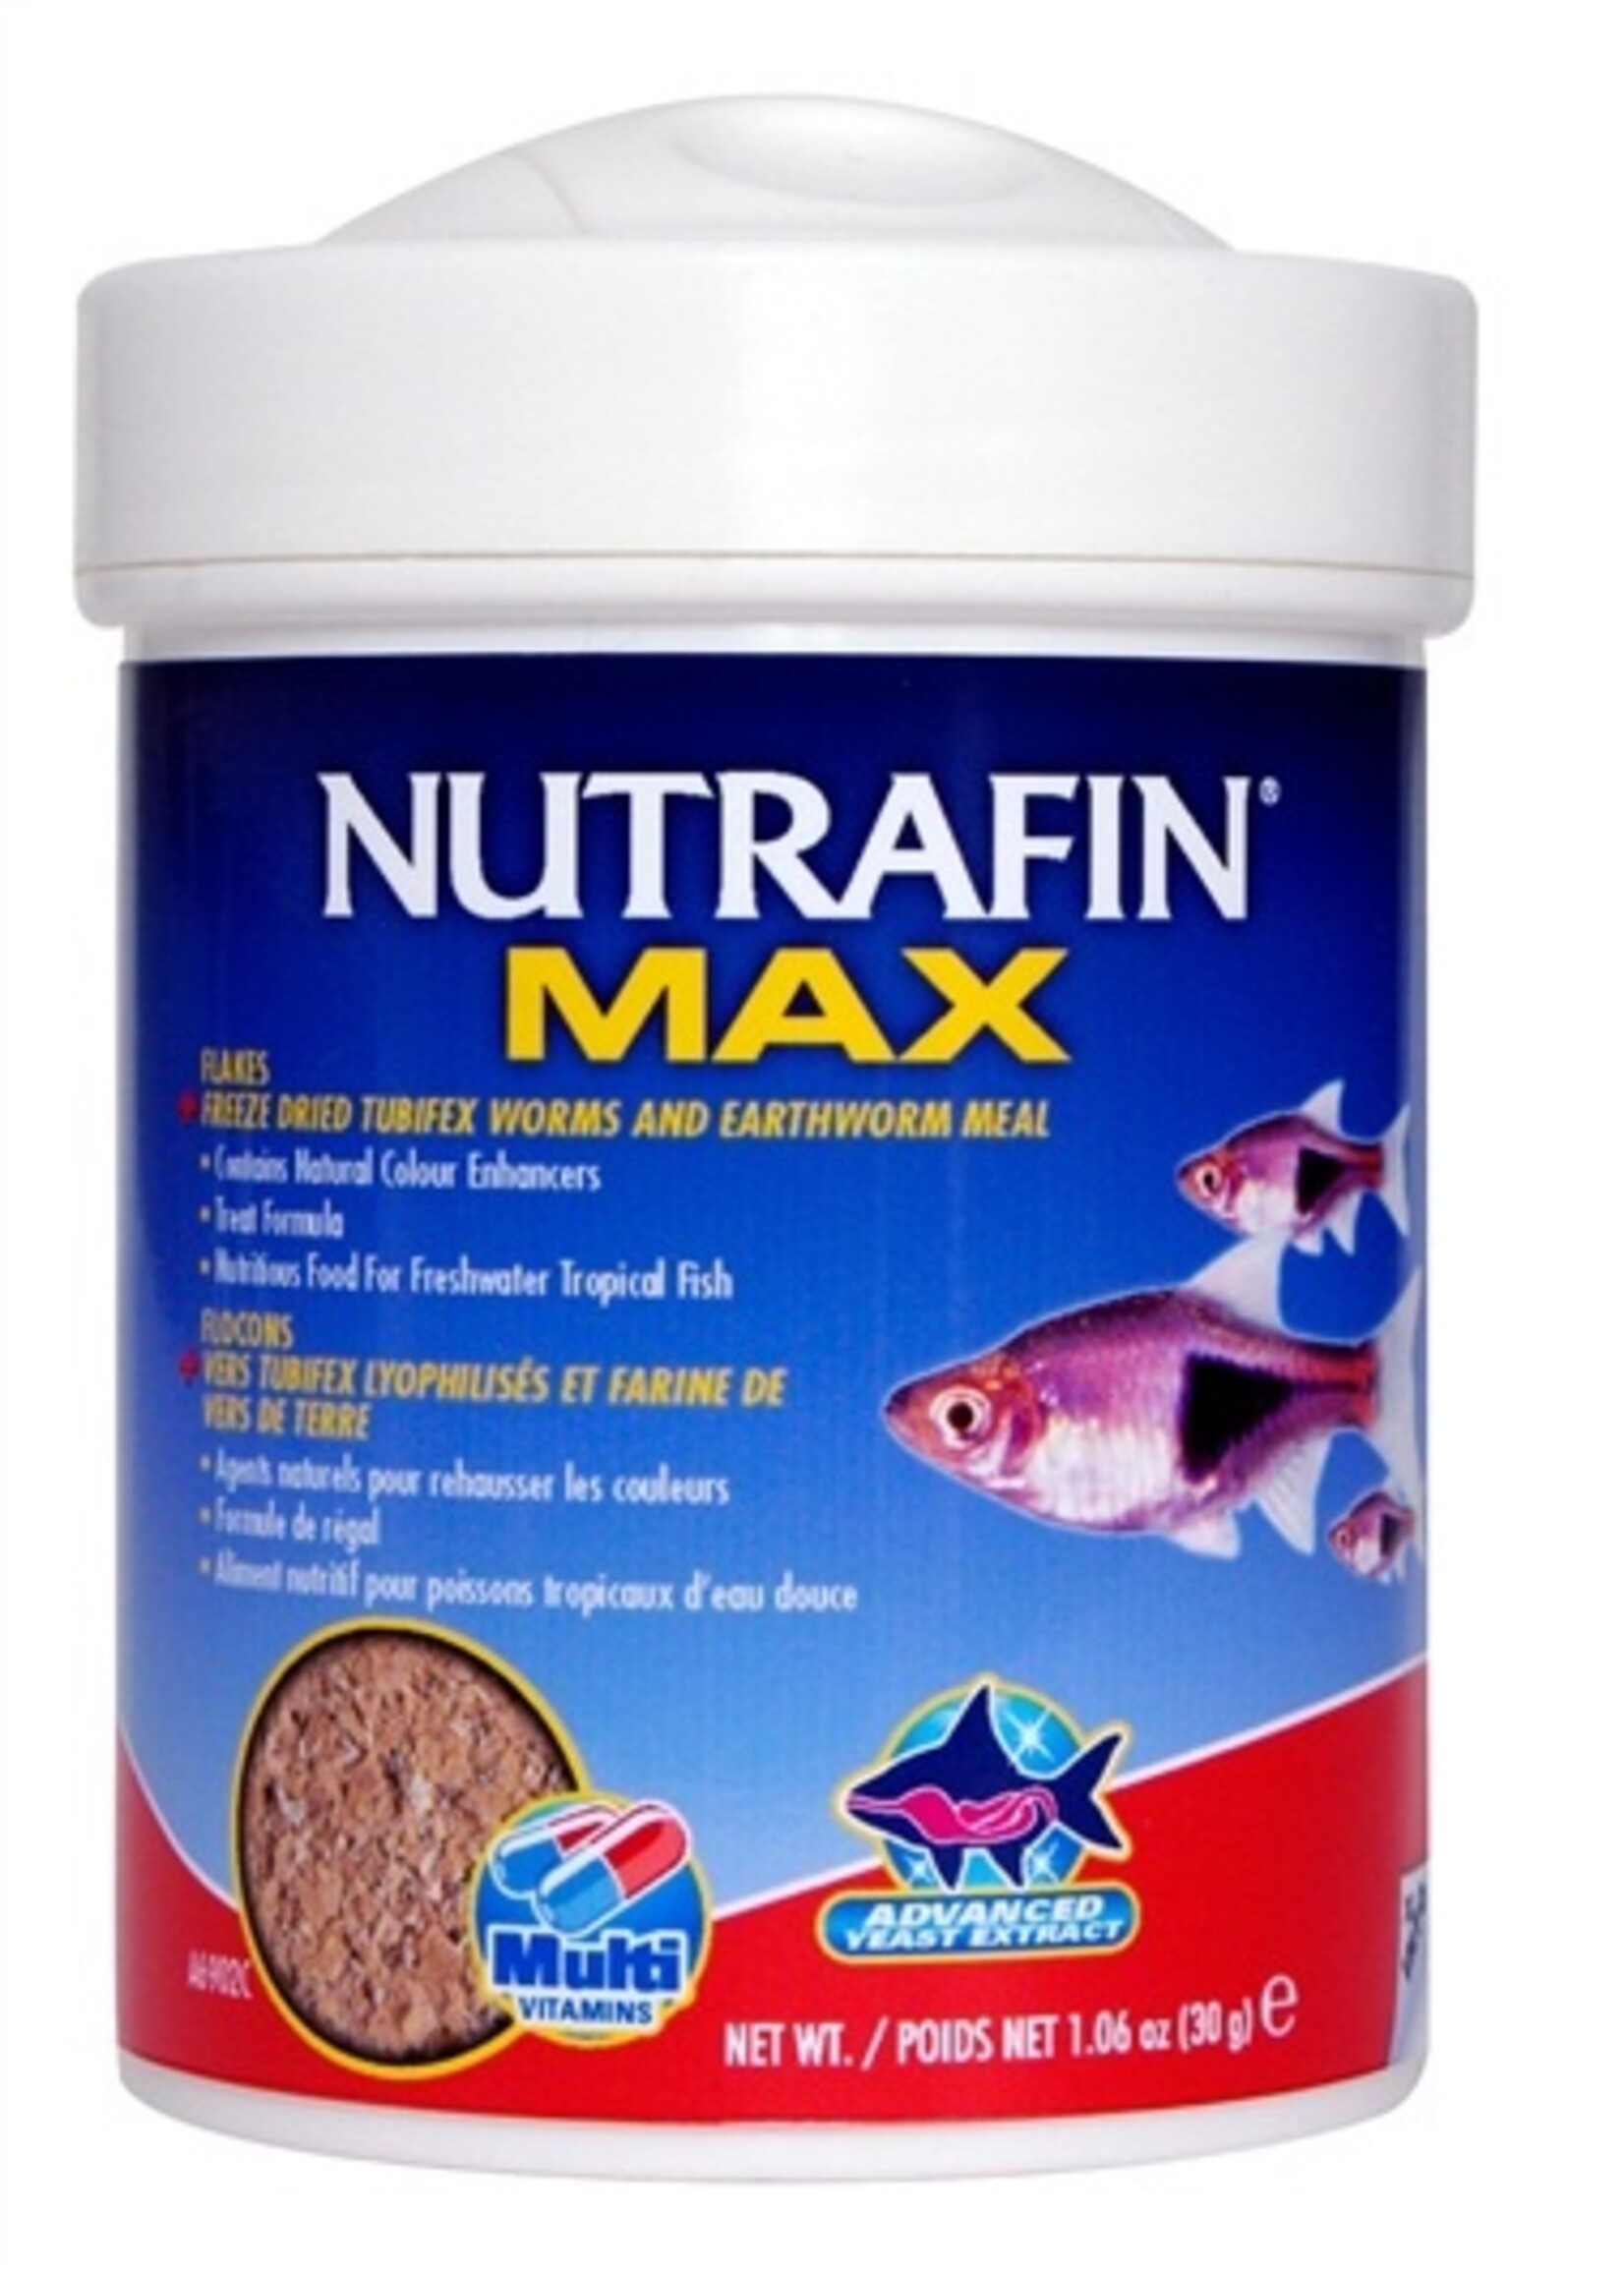 Nutrafin Nutrafin Max Flakes + Freeze Dried Tubifex Worms & Earthworm Meal 30g